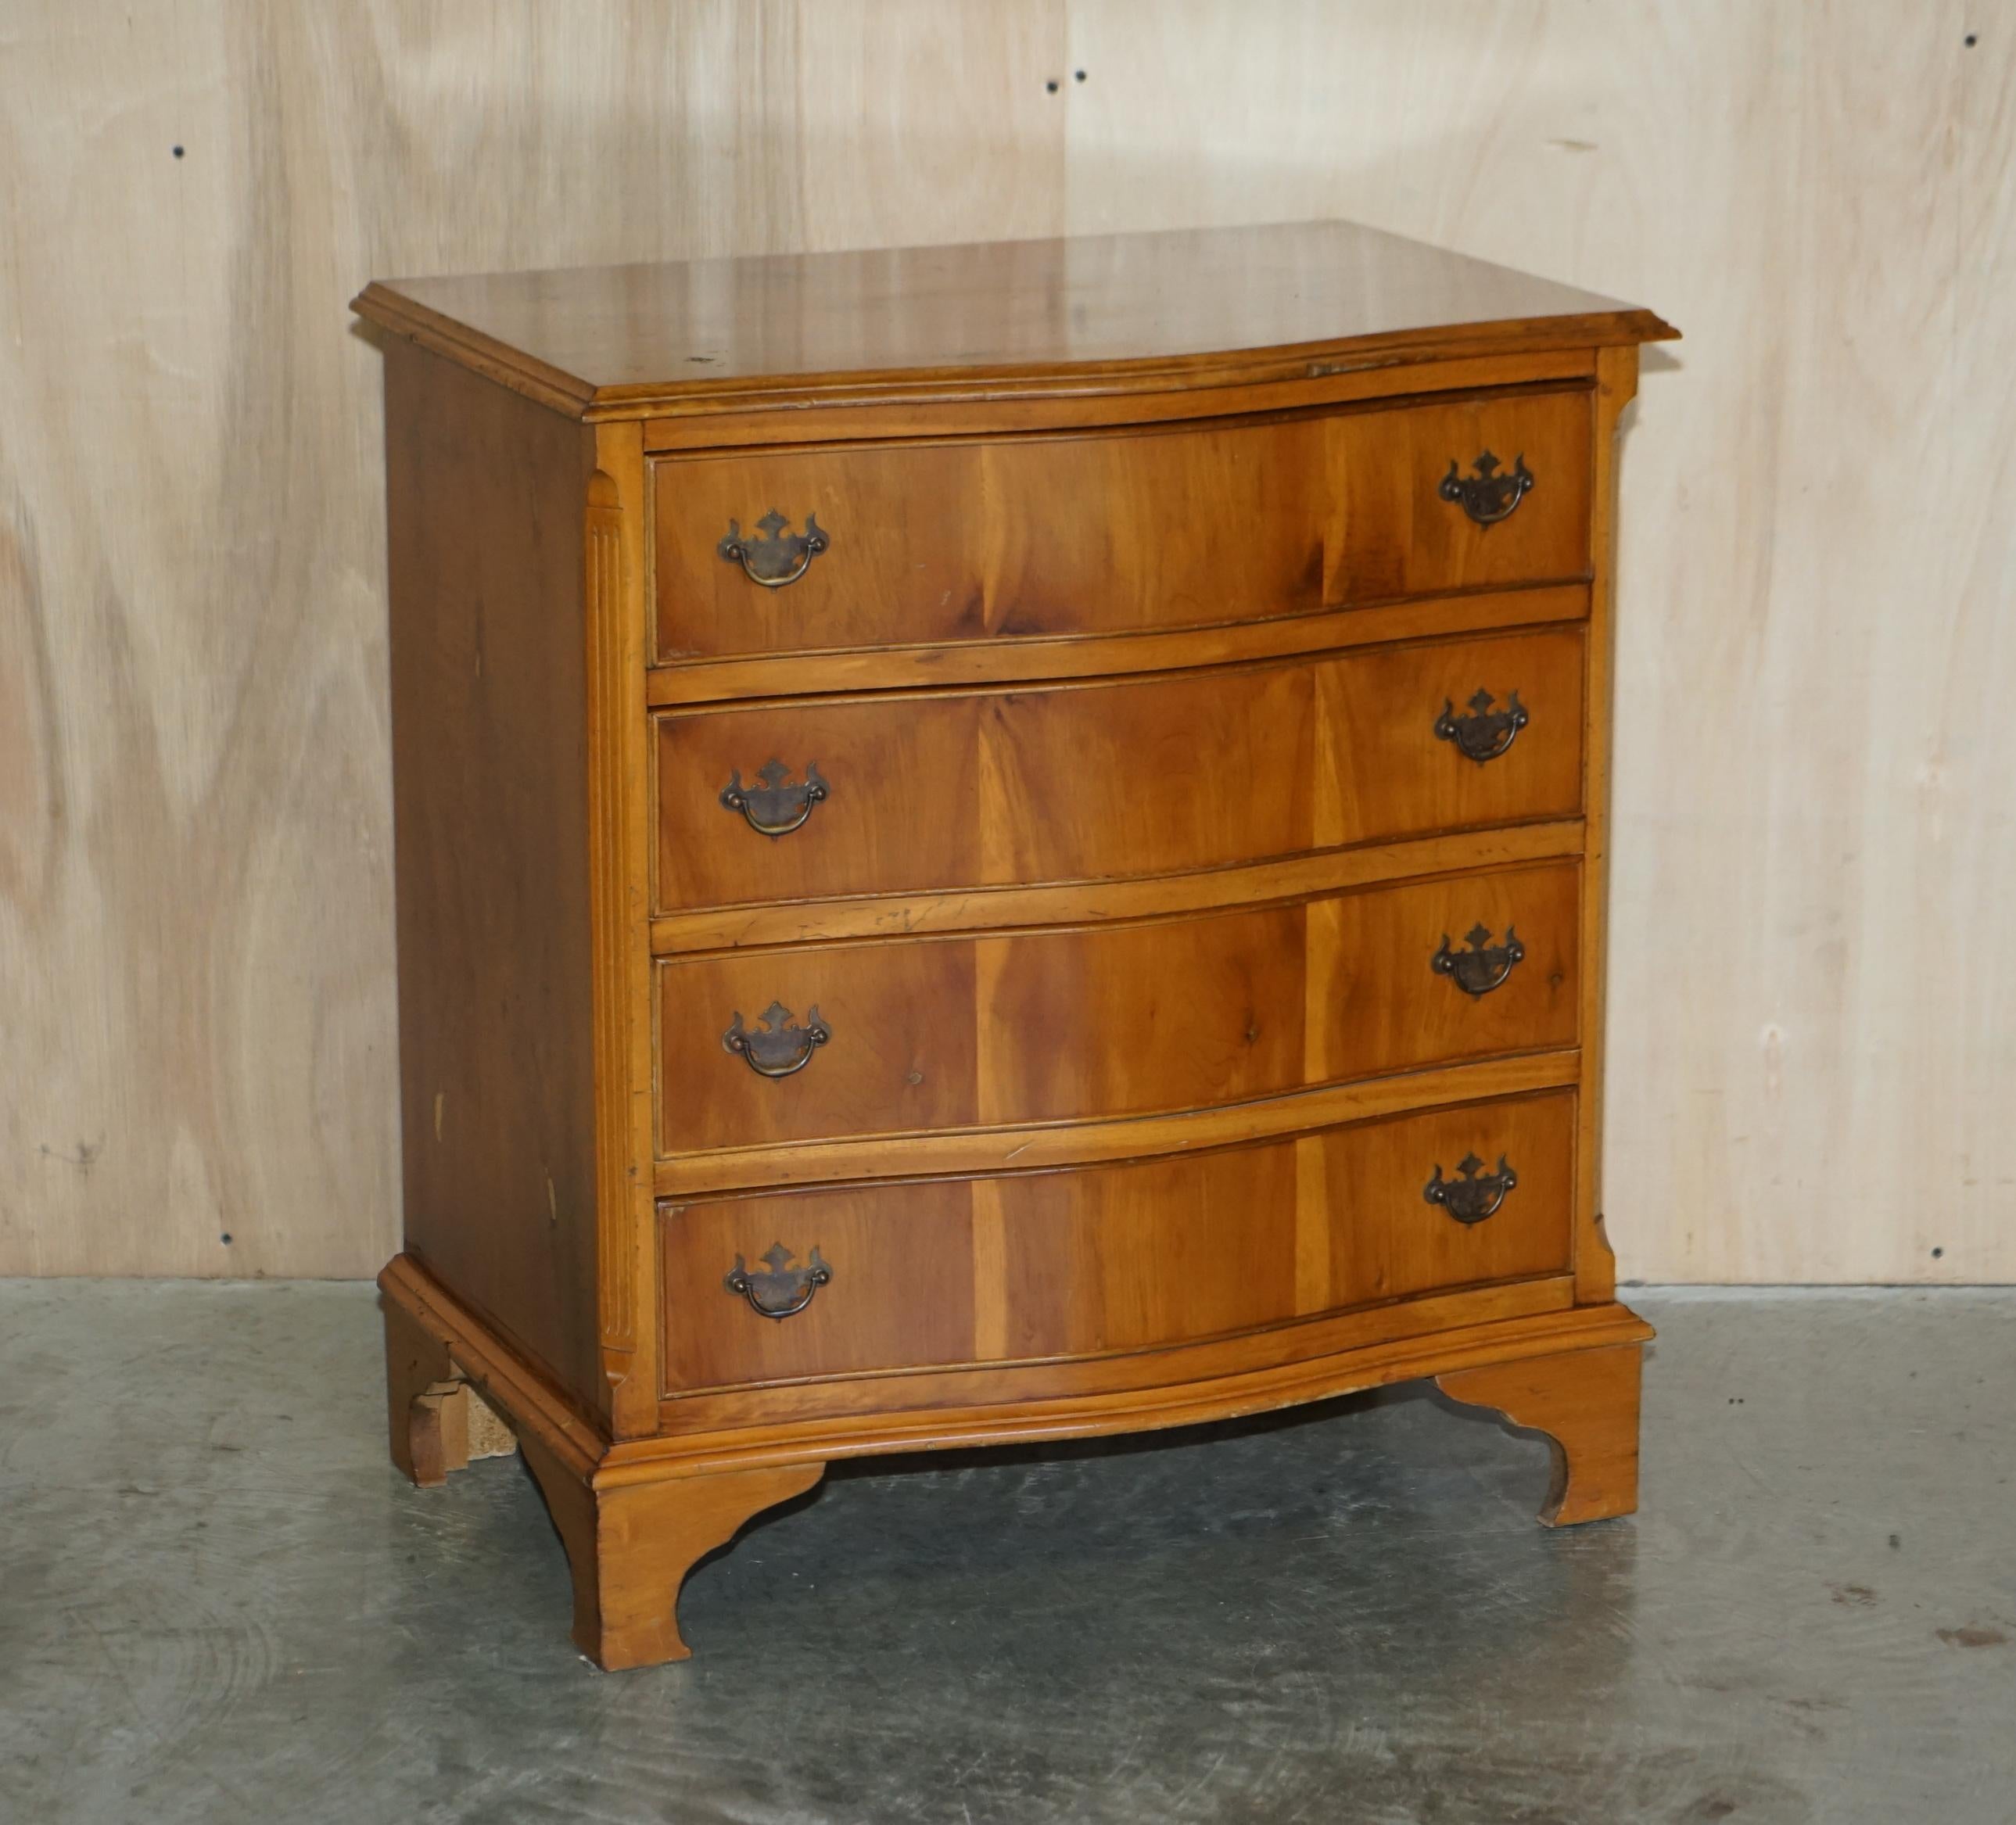 We are delighted to offer for sale this lovely pair of larger than normal Burr & Burl yew wood bedside / side table sized chests of drawers

A good looking well made and utilitarian pair, they can sit in just about any room of the house and be